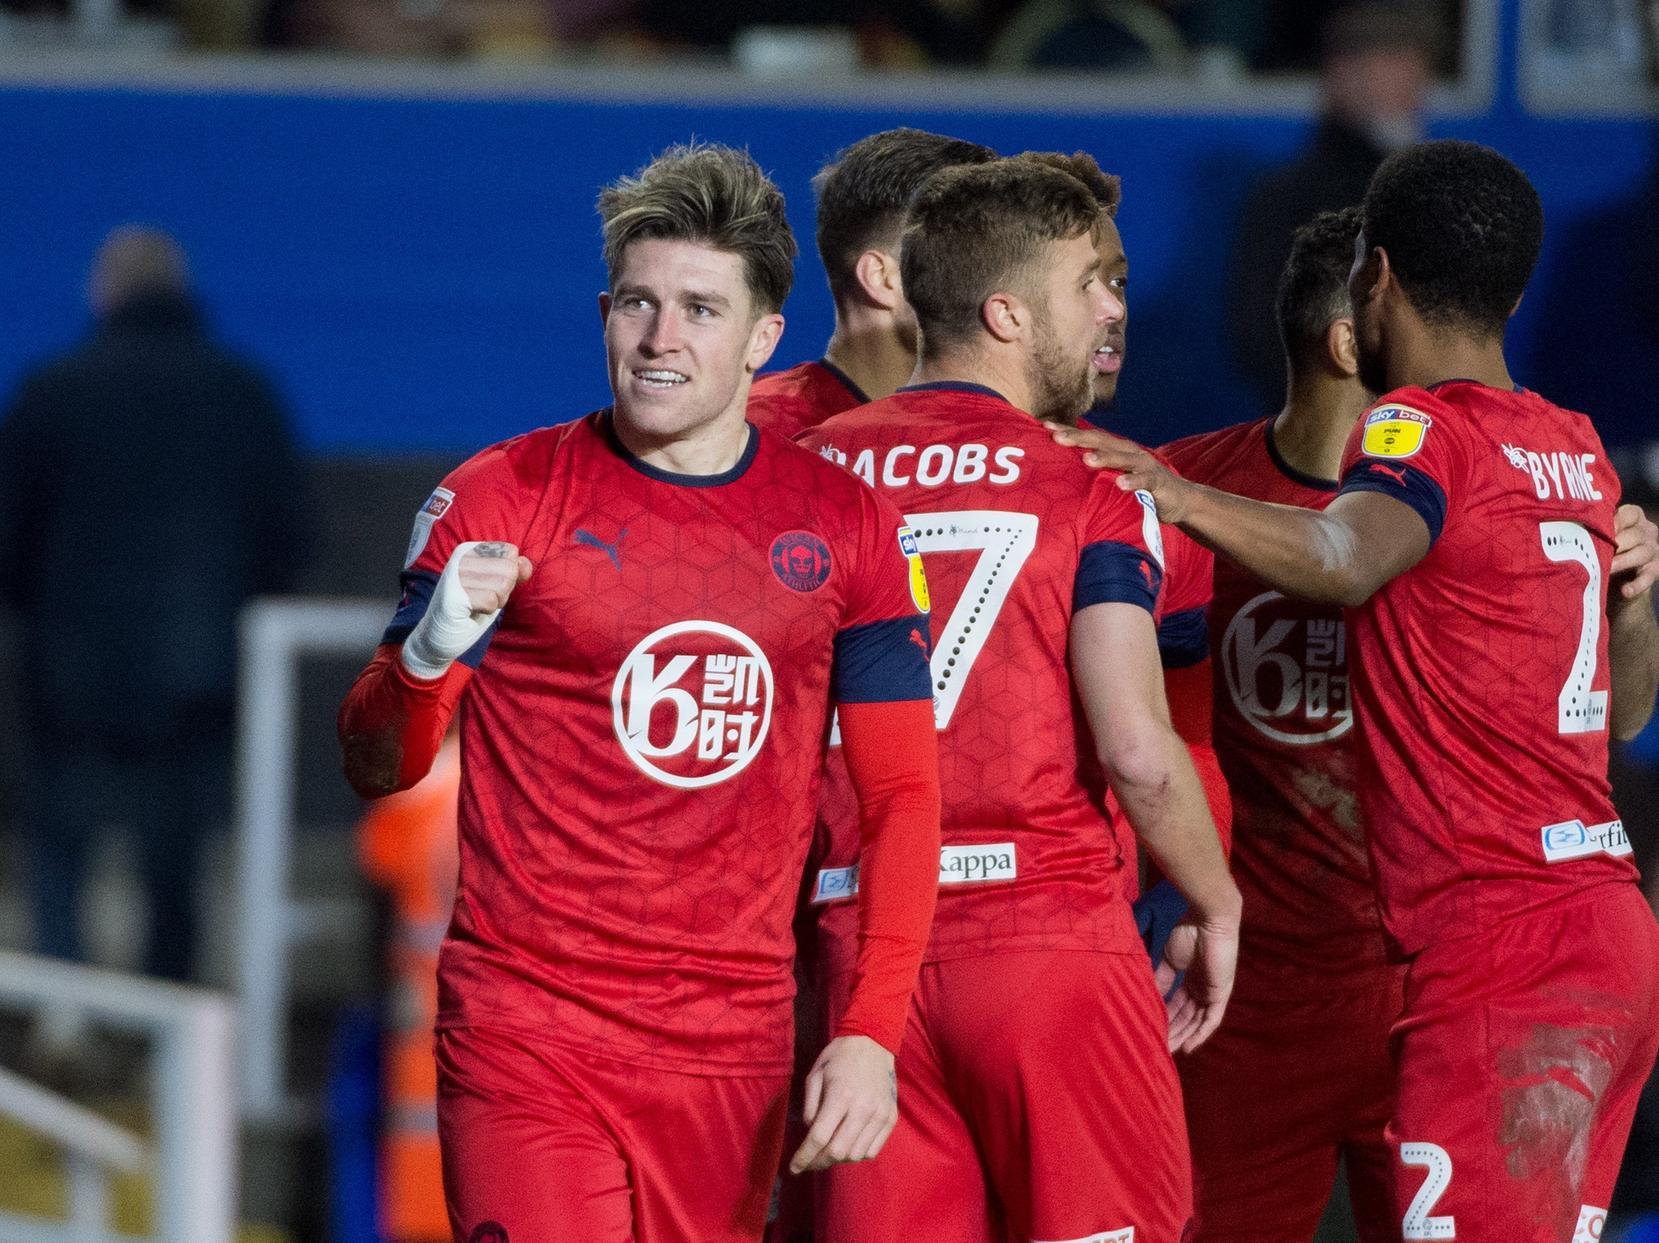 STAR MAN
Josh Windass: 9 - Arguably his best game for Latics, opened the scoring and big hand in the other two goals.